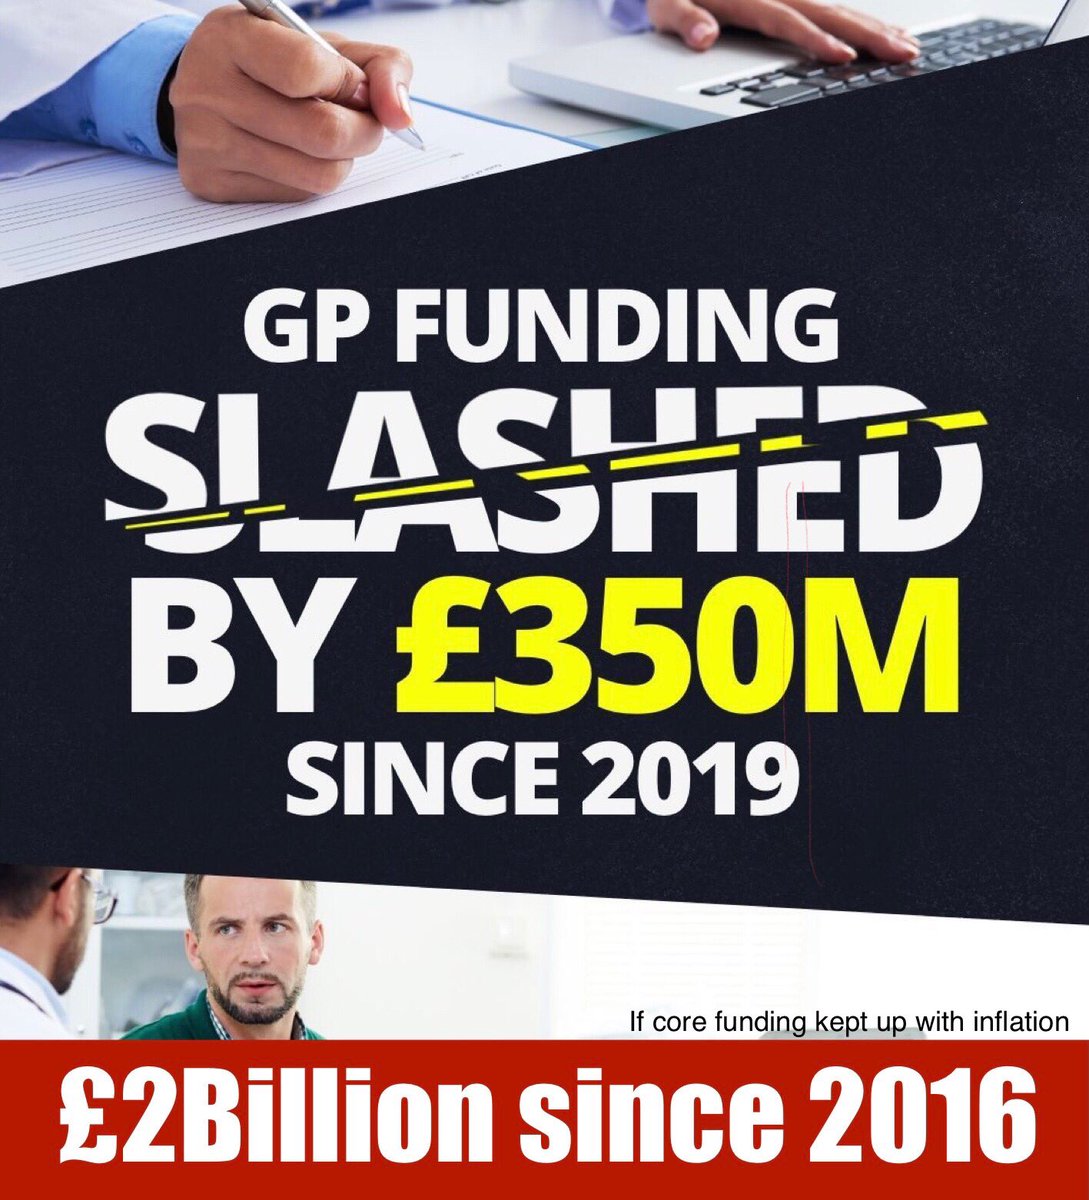 AVERAGE COST OF APPOINTMENT TO THE NHS Pharmacy First - £40 ARRS - £35 GP - £23 Which ones do the Government & NHSE support? Which one is more needed & safer for patient care? GPs are leaving, one at a time, then teams, then contracts handed back Blame MPs not GPs